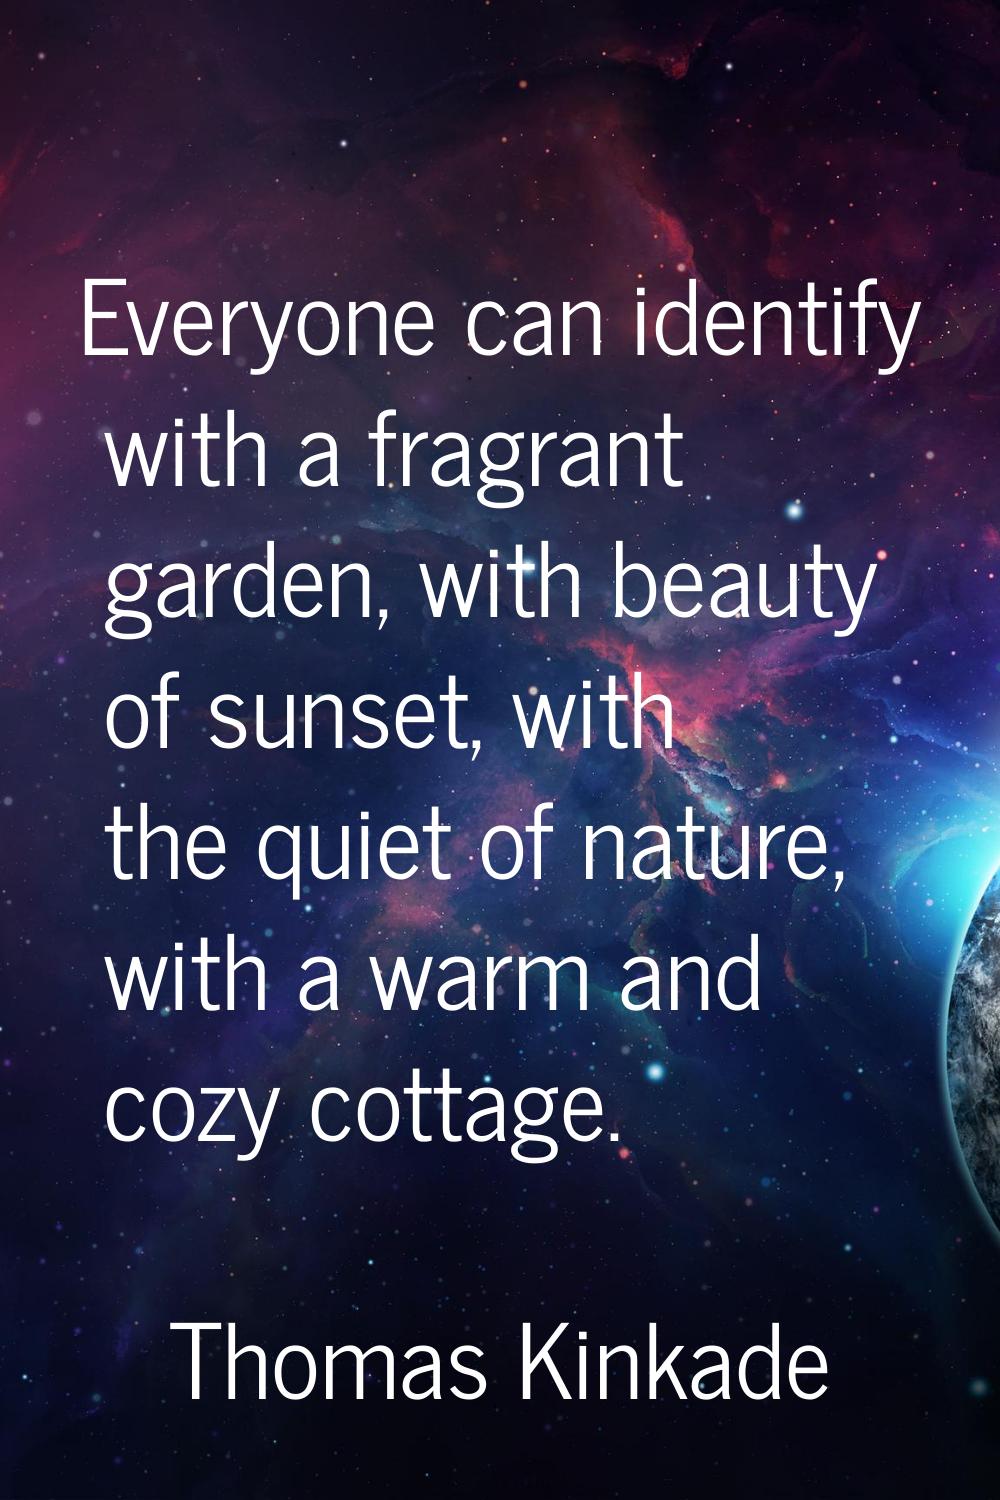 Everyone can identify with a fragrant garden, with beauty of sunset, with the quiet of nature, with